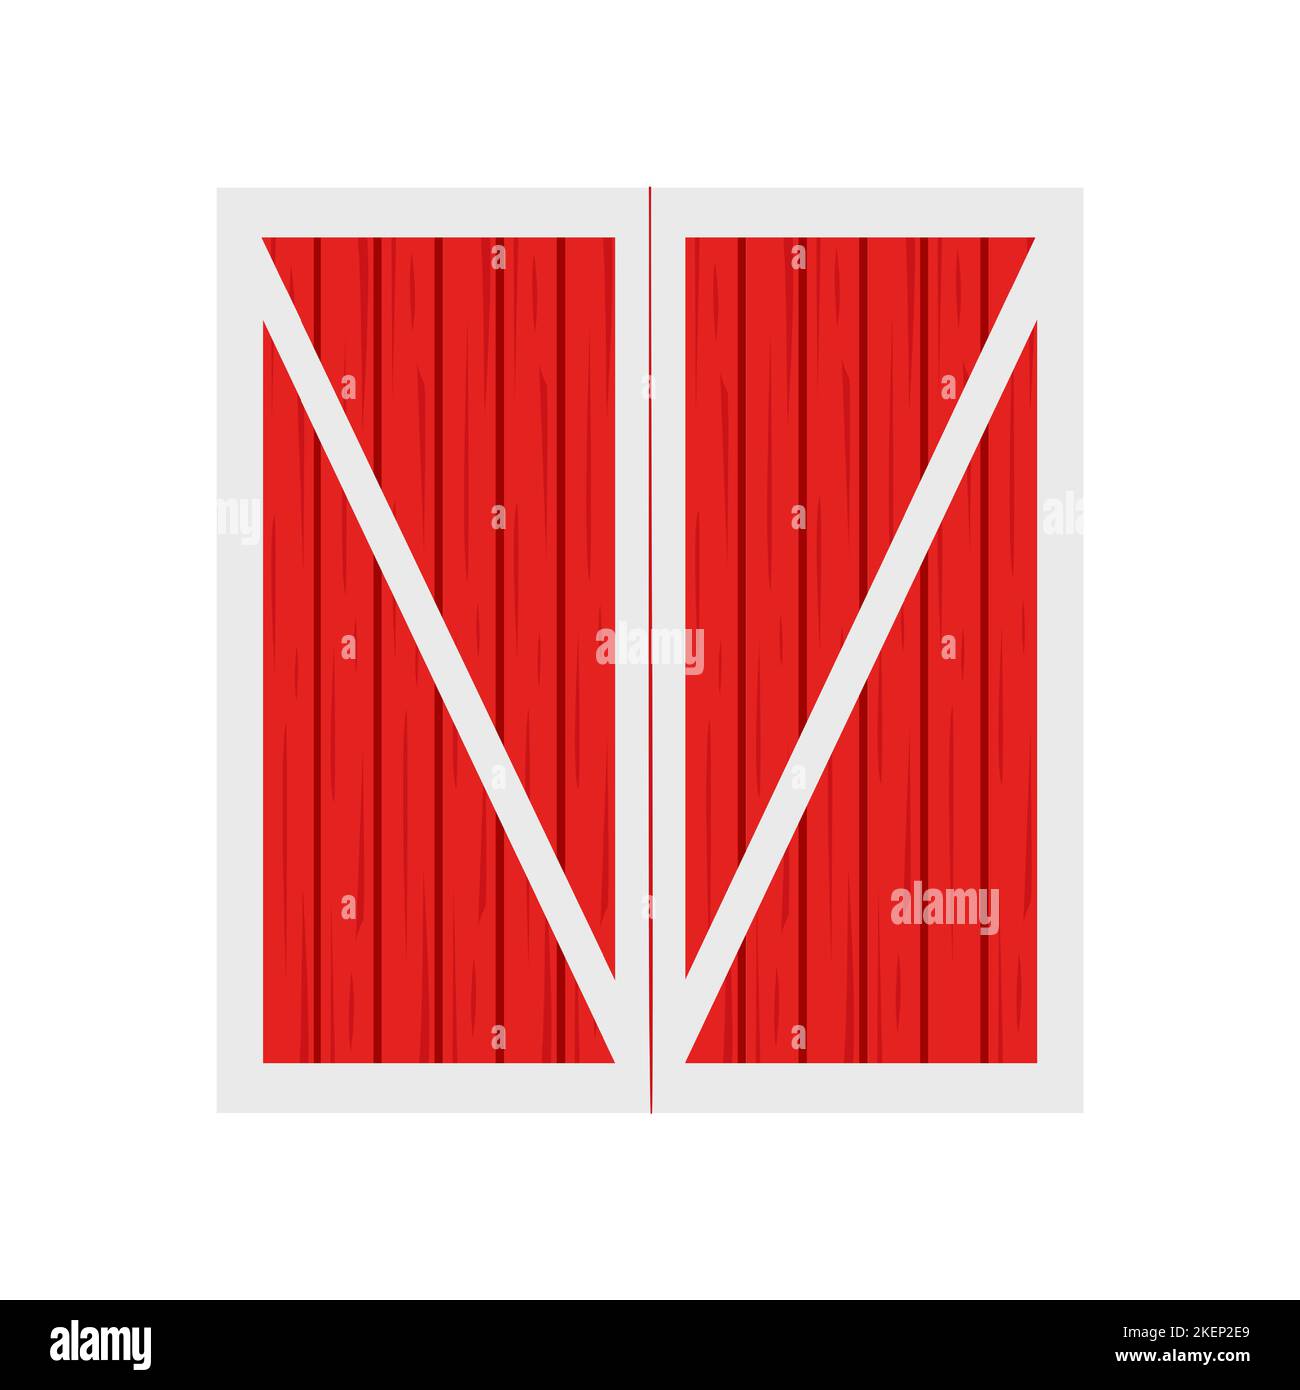 Red wooden barn door. Front view. Element of farm warehouse building isolated on white background. Vector cartoon illustration. Stock Vector